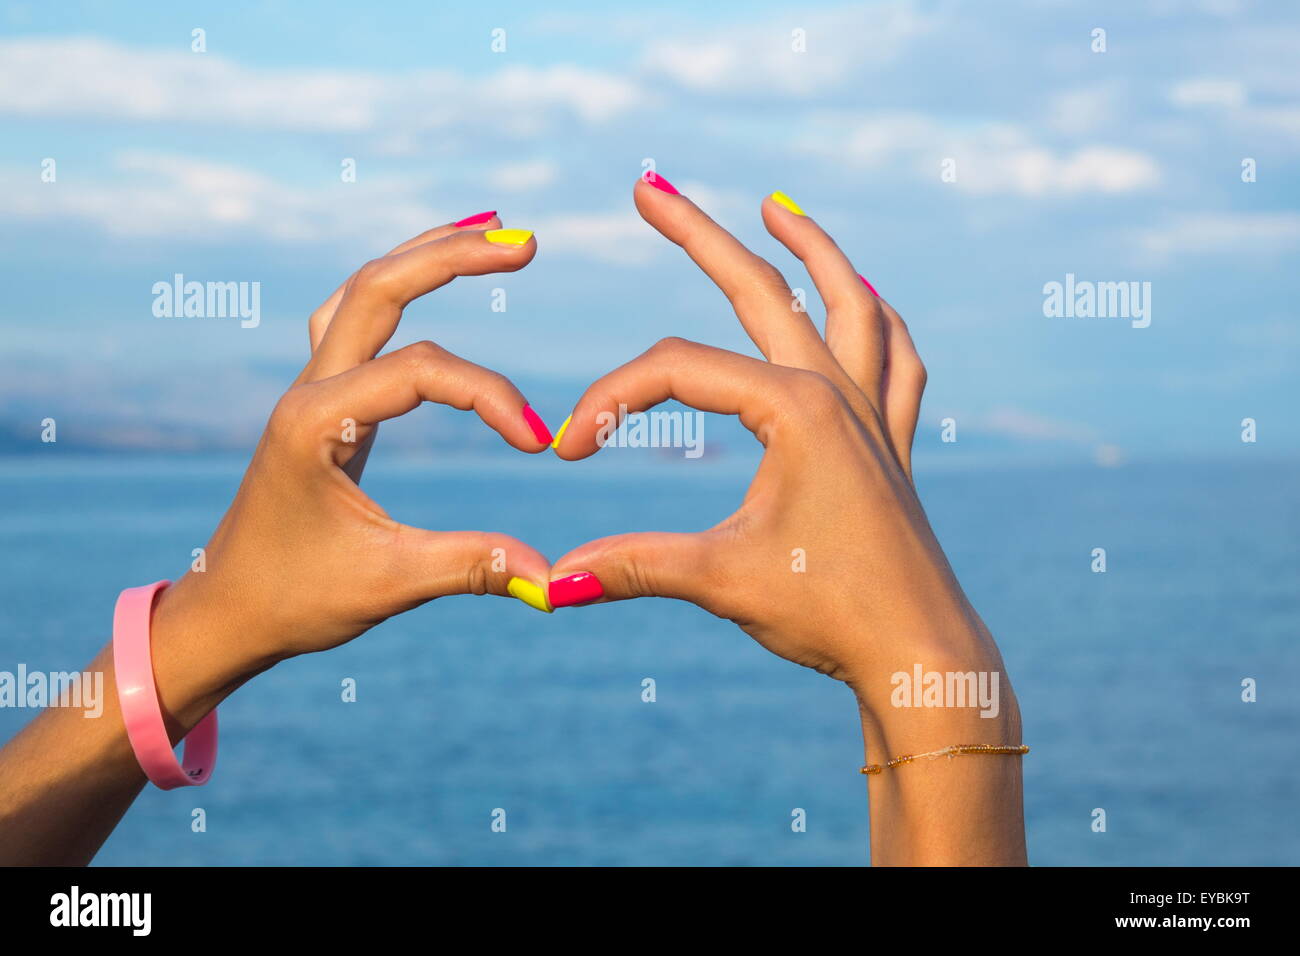 Heart shape making of hands against sea and sky looking at water Stock Photo